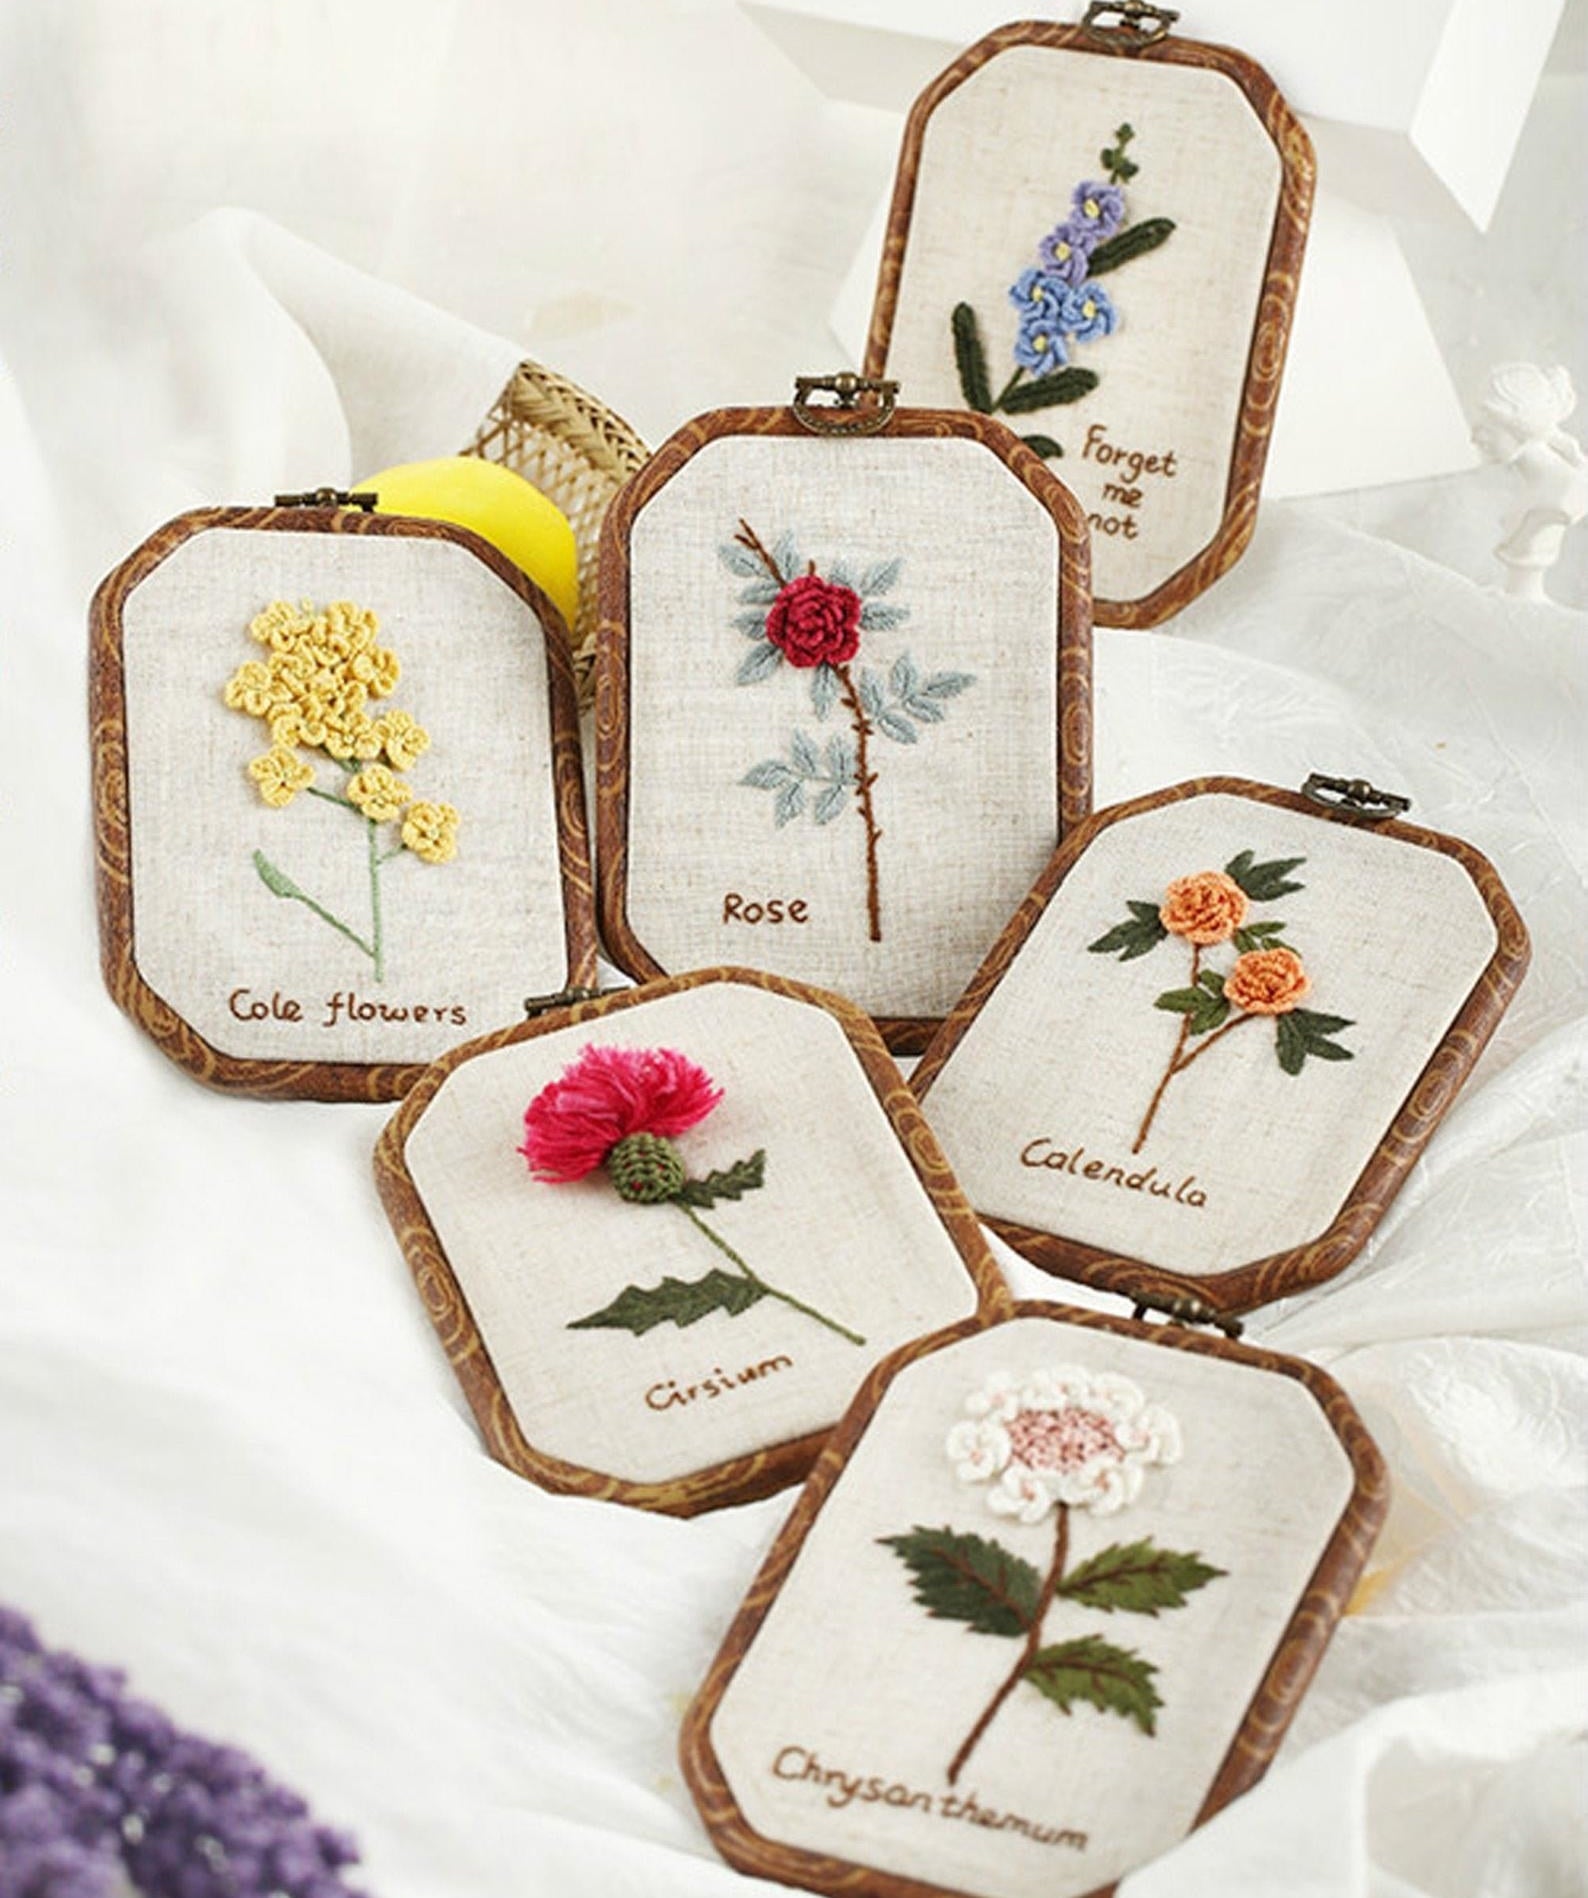 various embroidered flowers including a rose, cole flowers, calendula, forget me not, and more